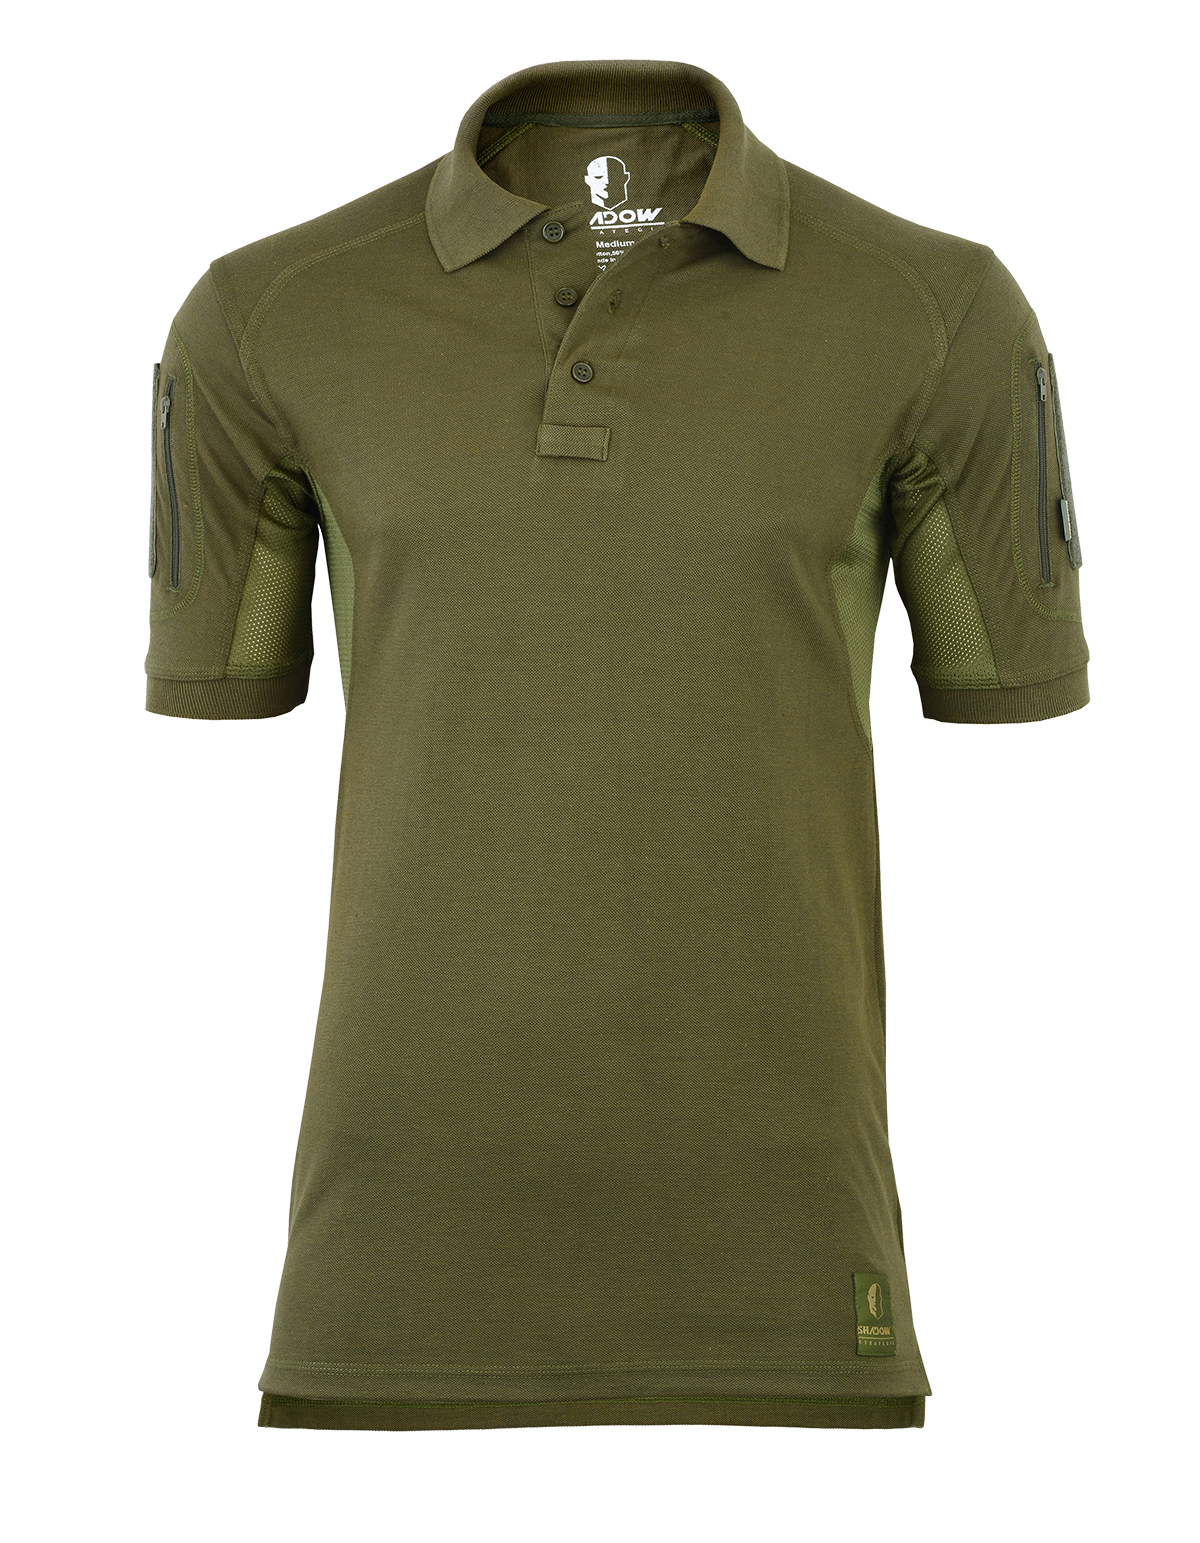 Tactical Zone Operator Polo shirt OD front